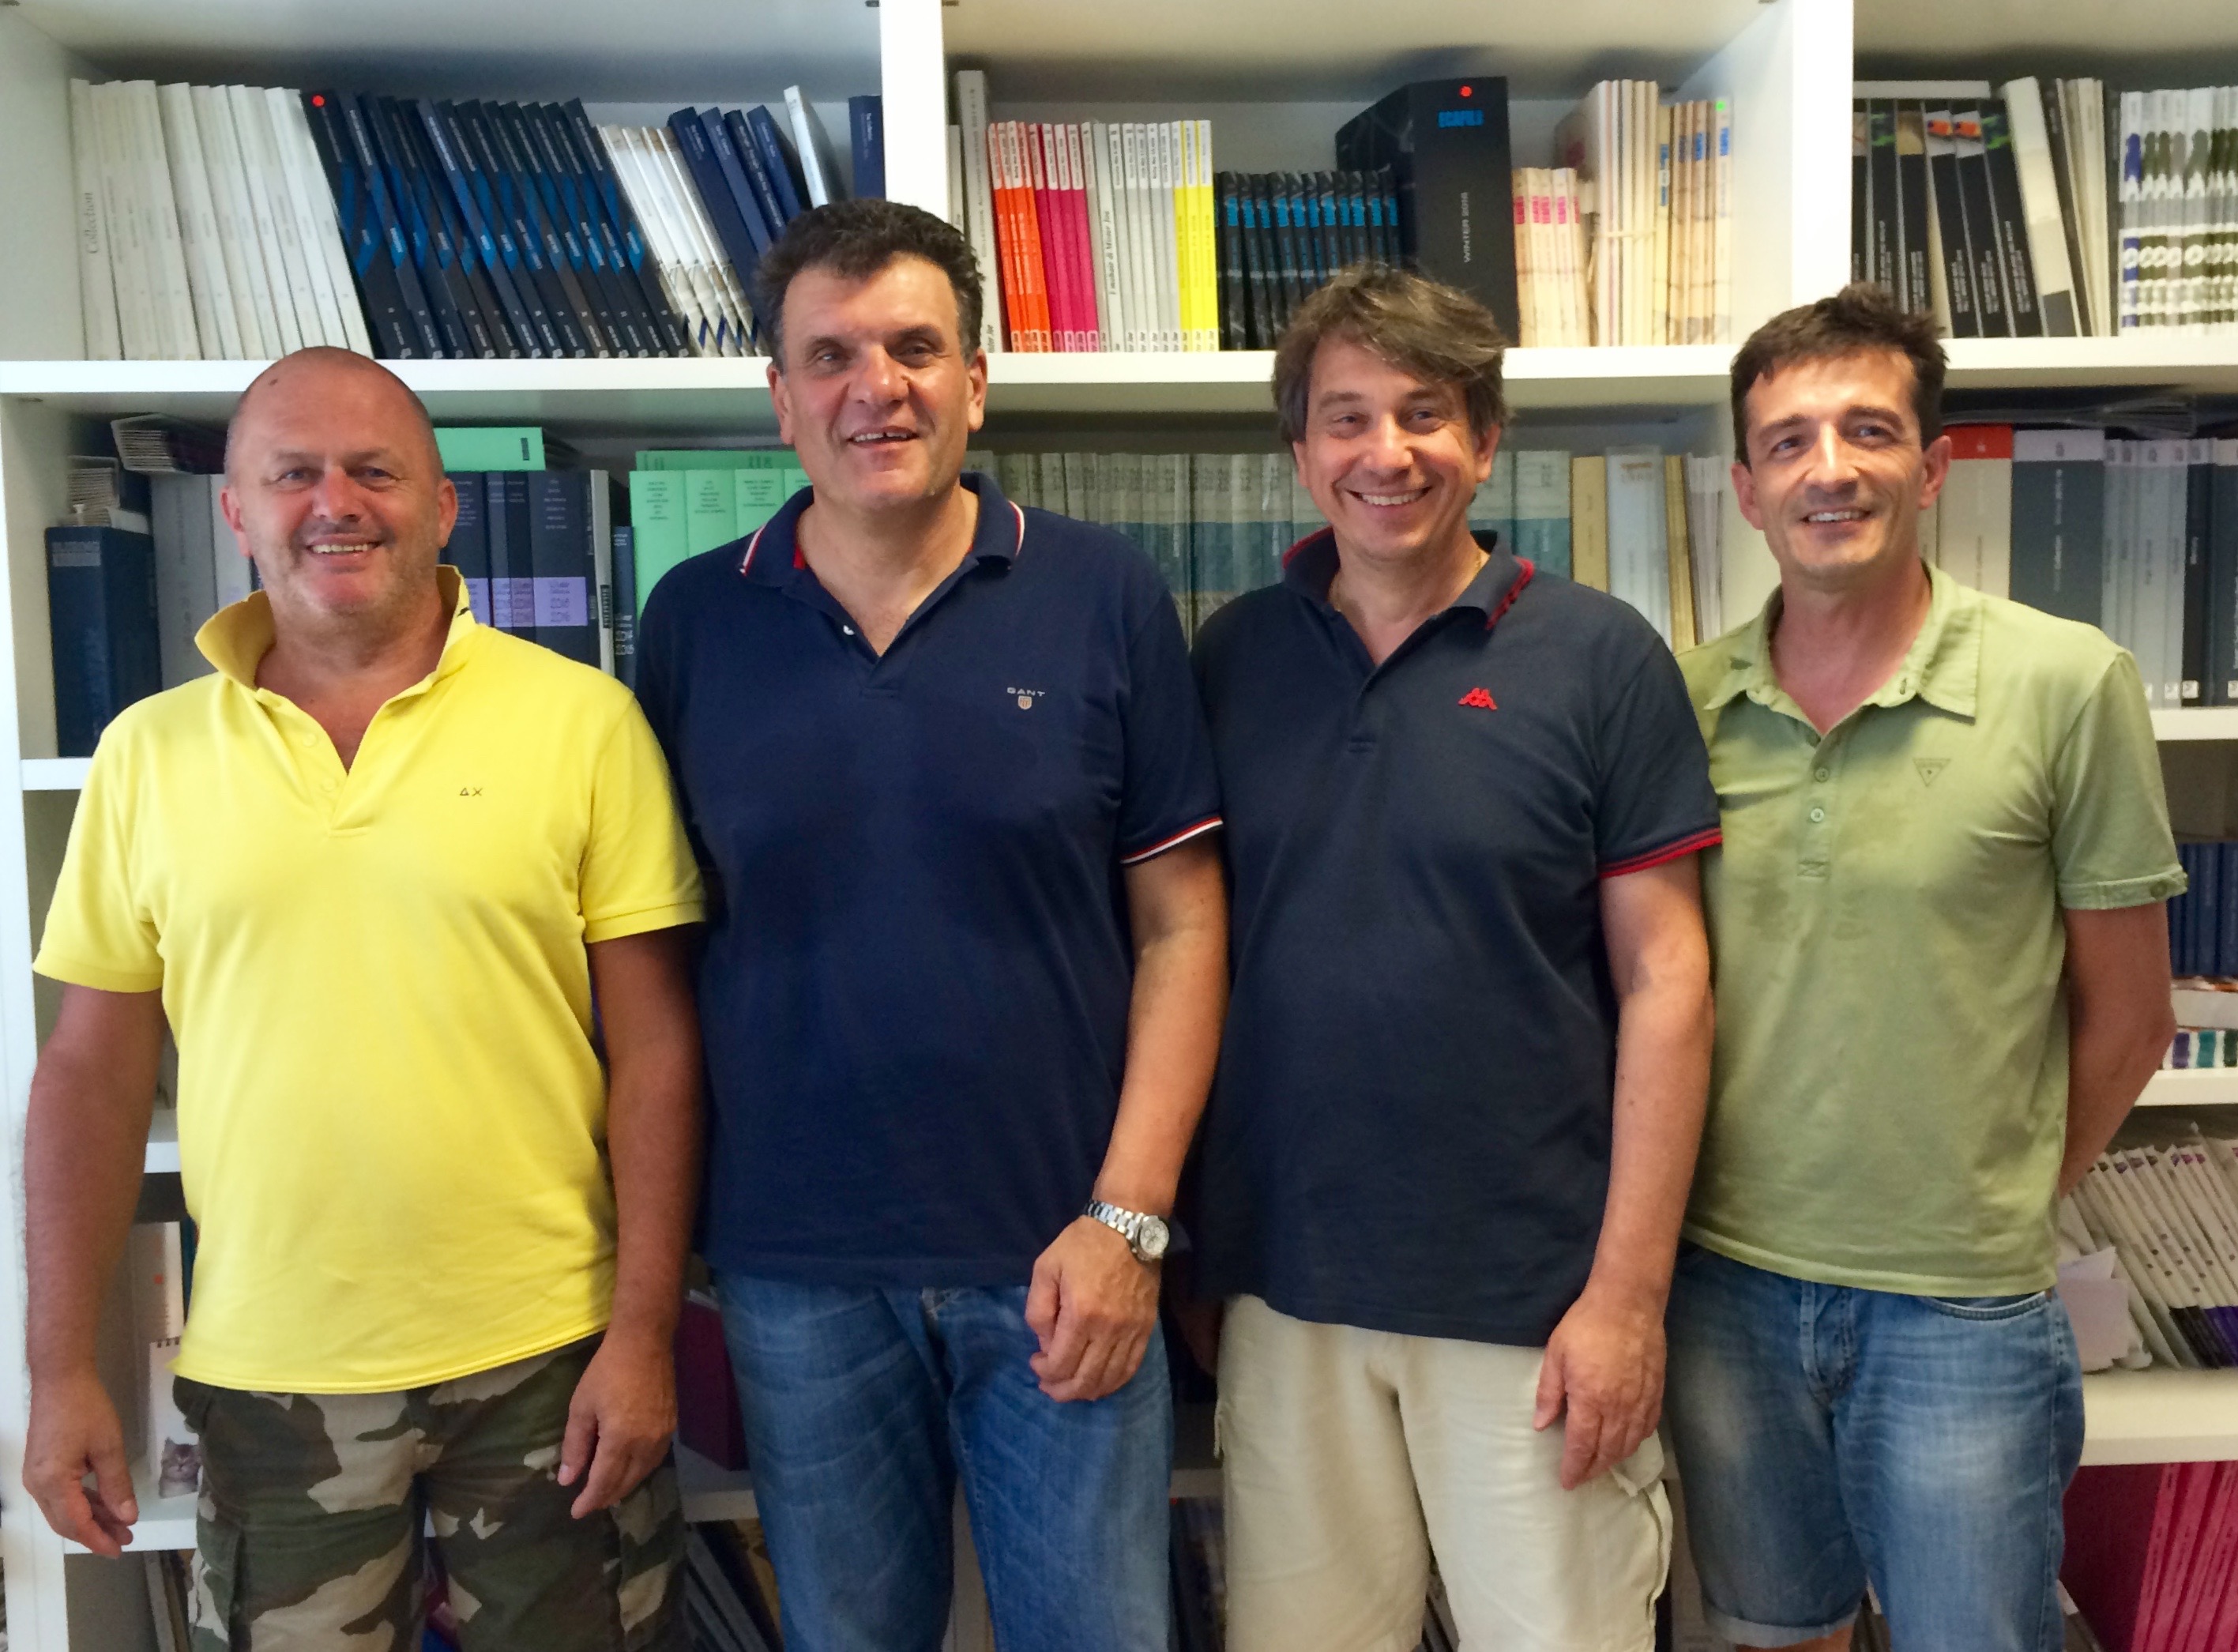 Paolo Buso, Diego Gerotto, Daniele Turra and Luca Zamboni, owners and founders of MIND Srl.